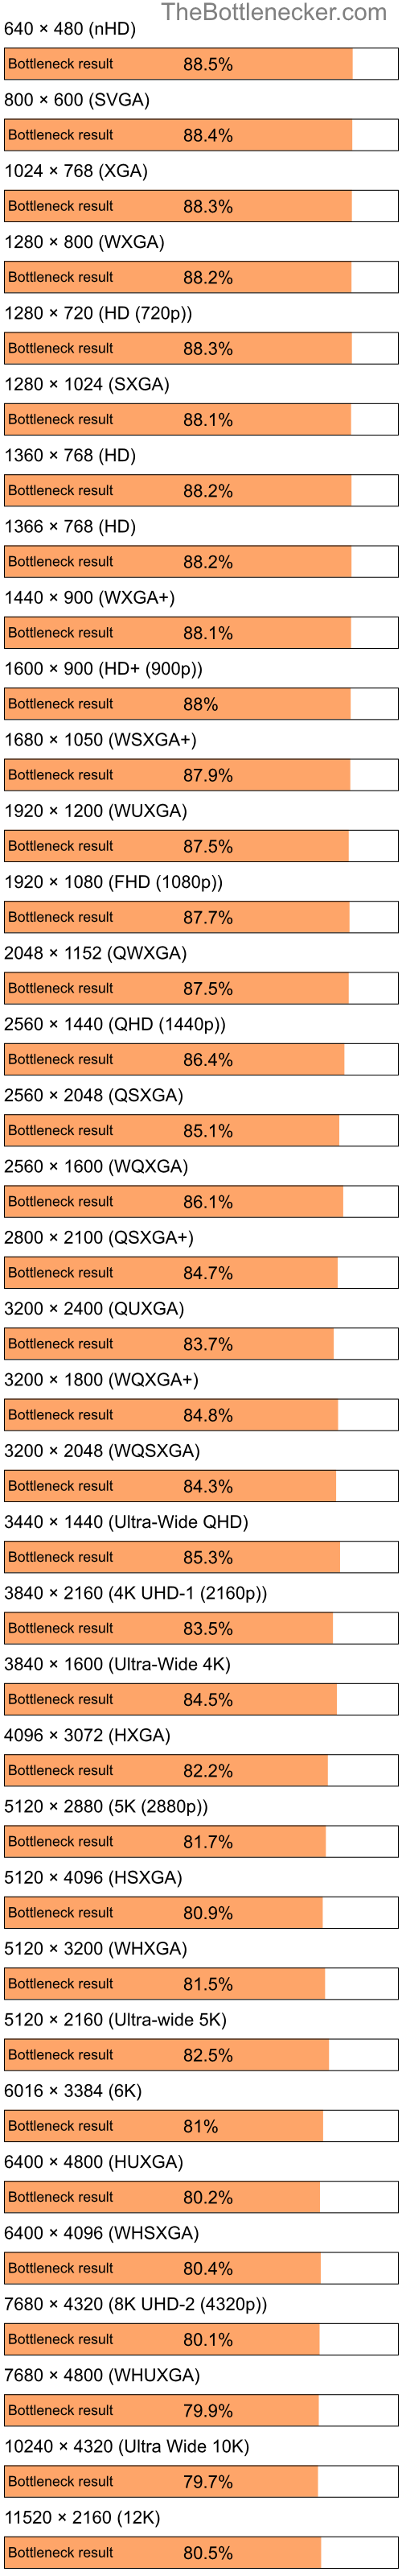 Bottleneck results by resolution for AMD Athlon XP 2000+ and NVIDIA GeForce RTX 4080 in Graphic Card Intense Tasks